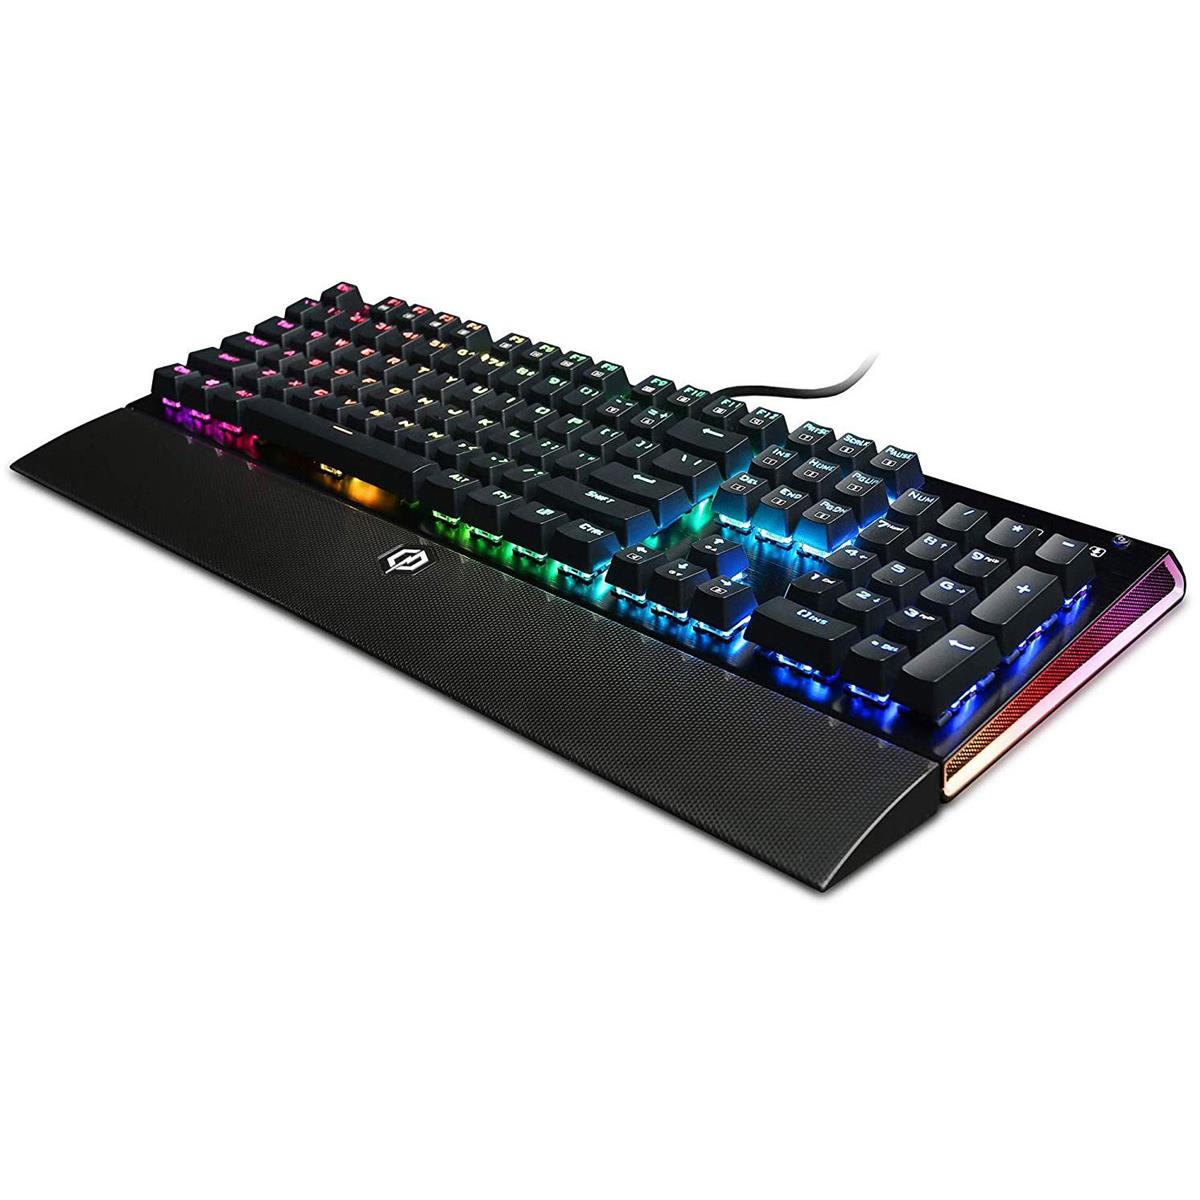 Image of CyberPowerPC Skorpion K2 RGB Gaming Keyboard with Kontact Blue (Clicky) Switches